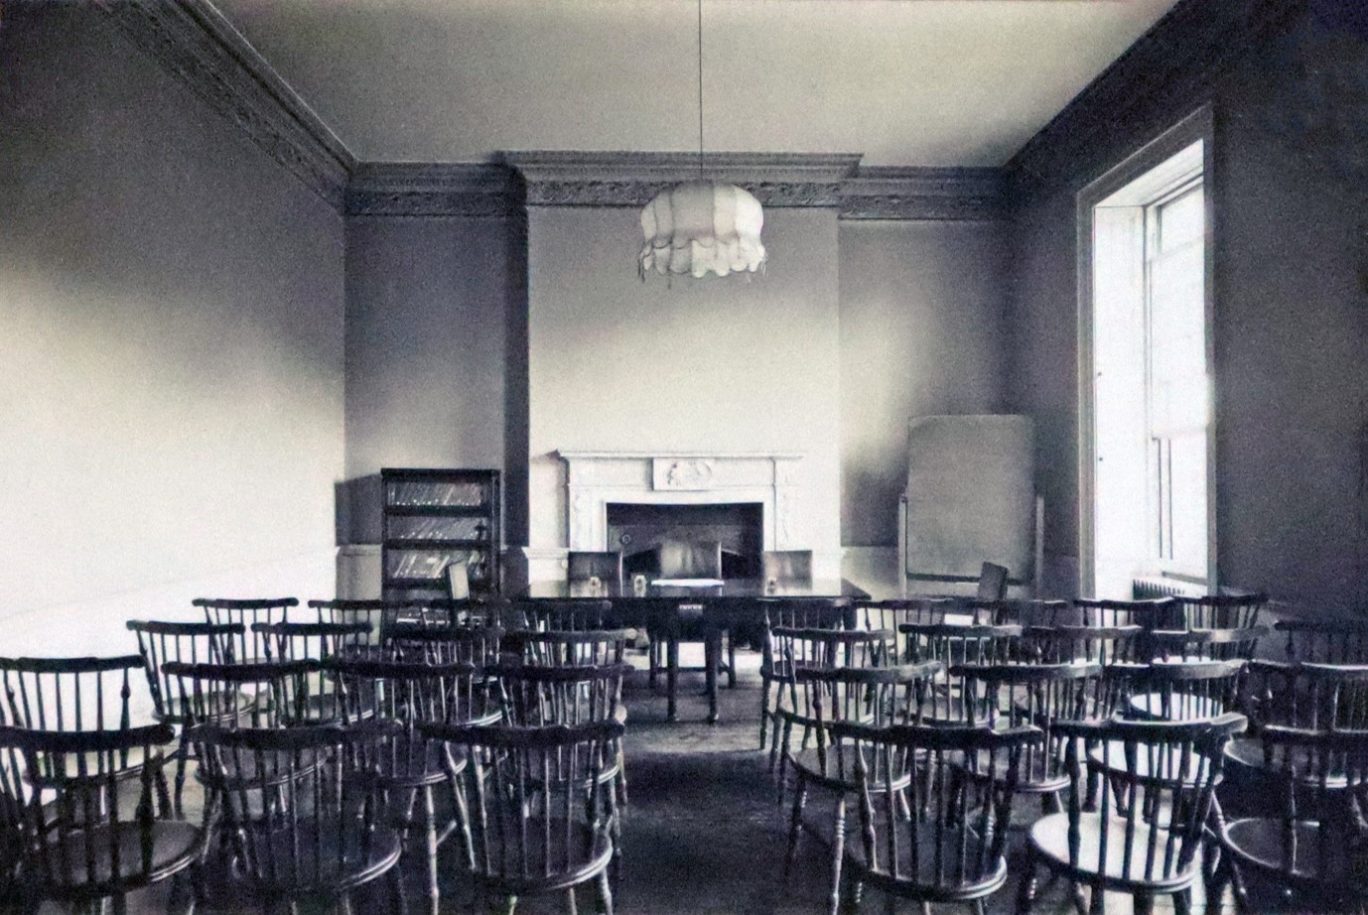 Historical black and white image of chairs arranged for a lecture